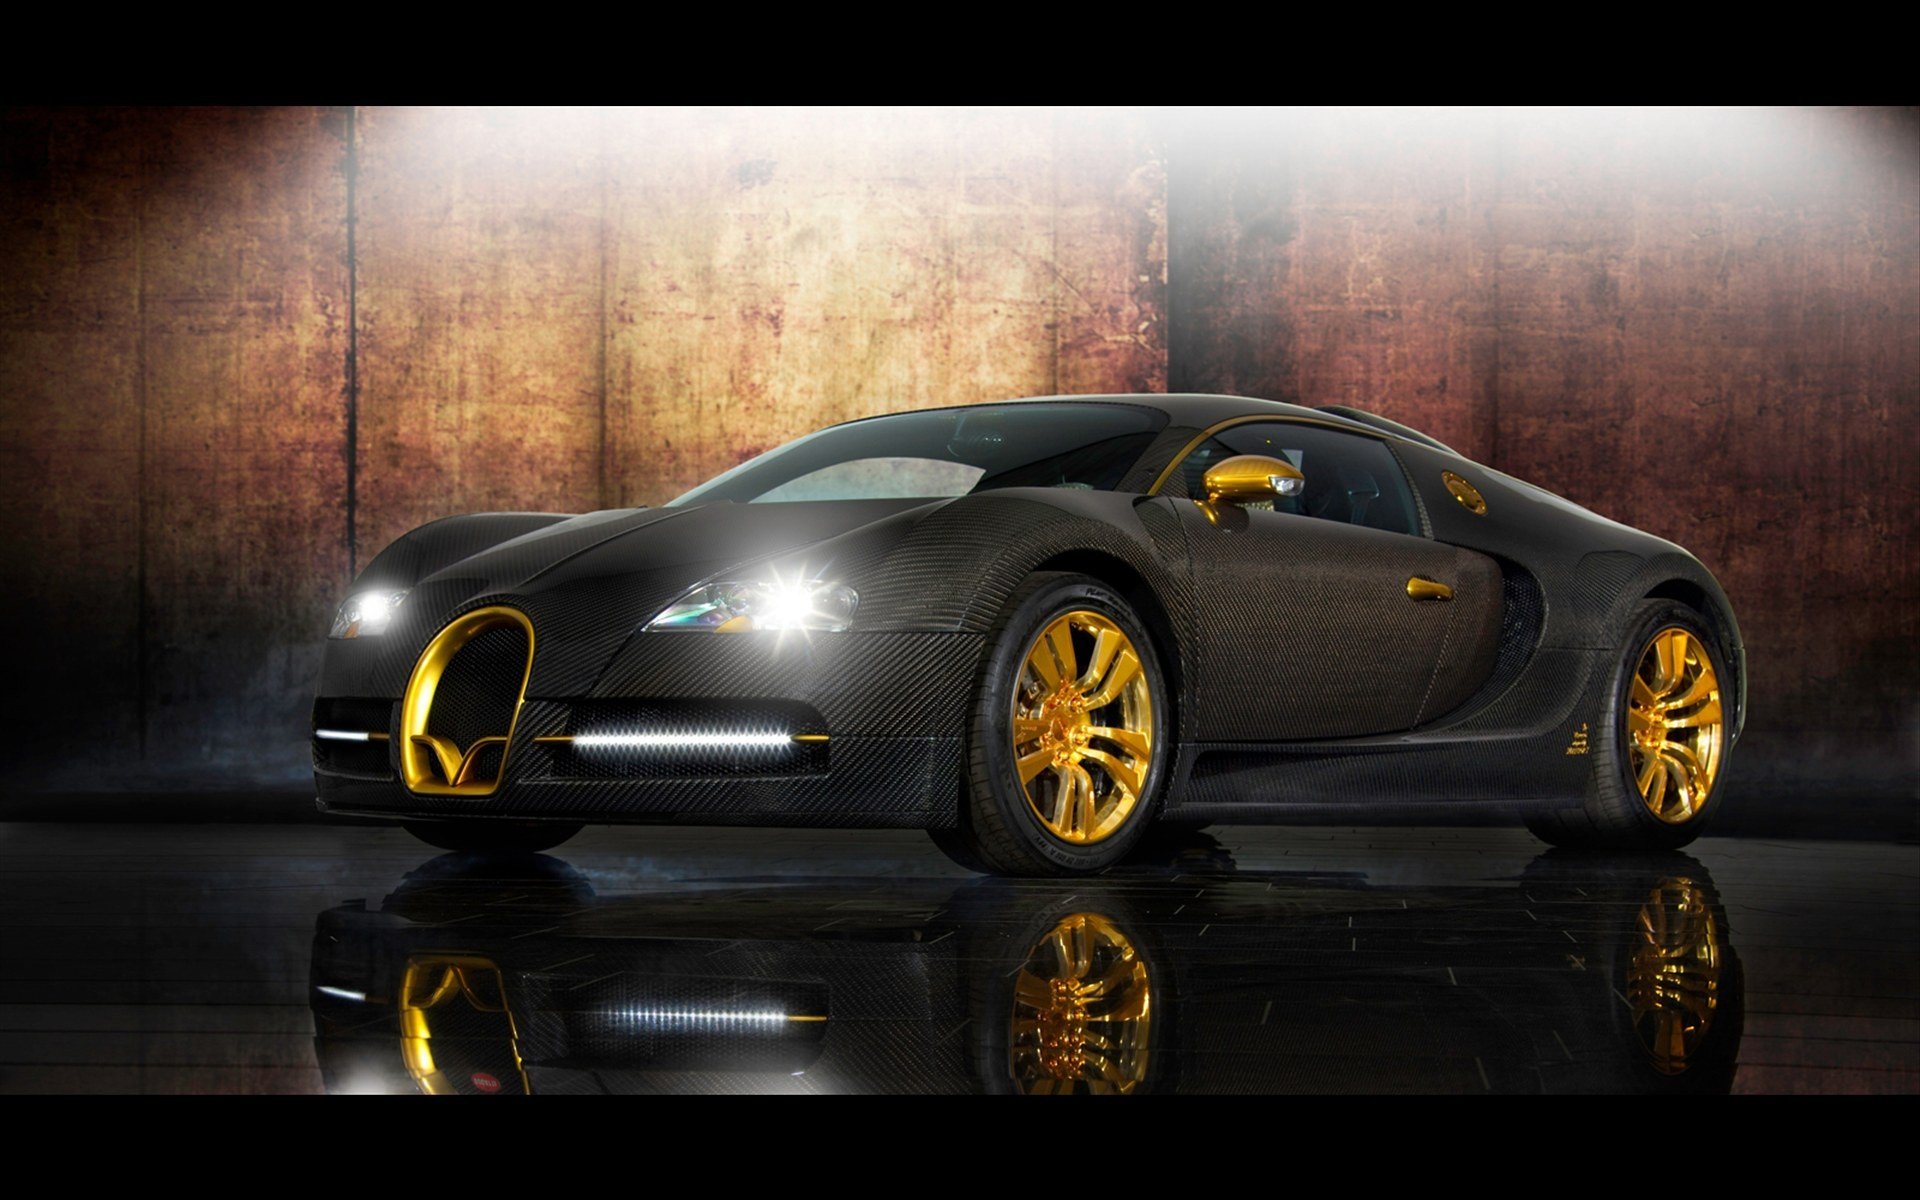 Cars gold bugatti veyron supercars carbon fiber mansory wallpapers hd desktop and mobile backgrounds